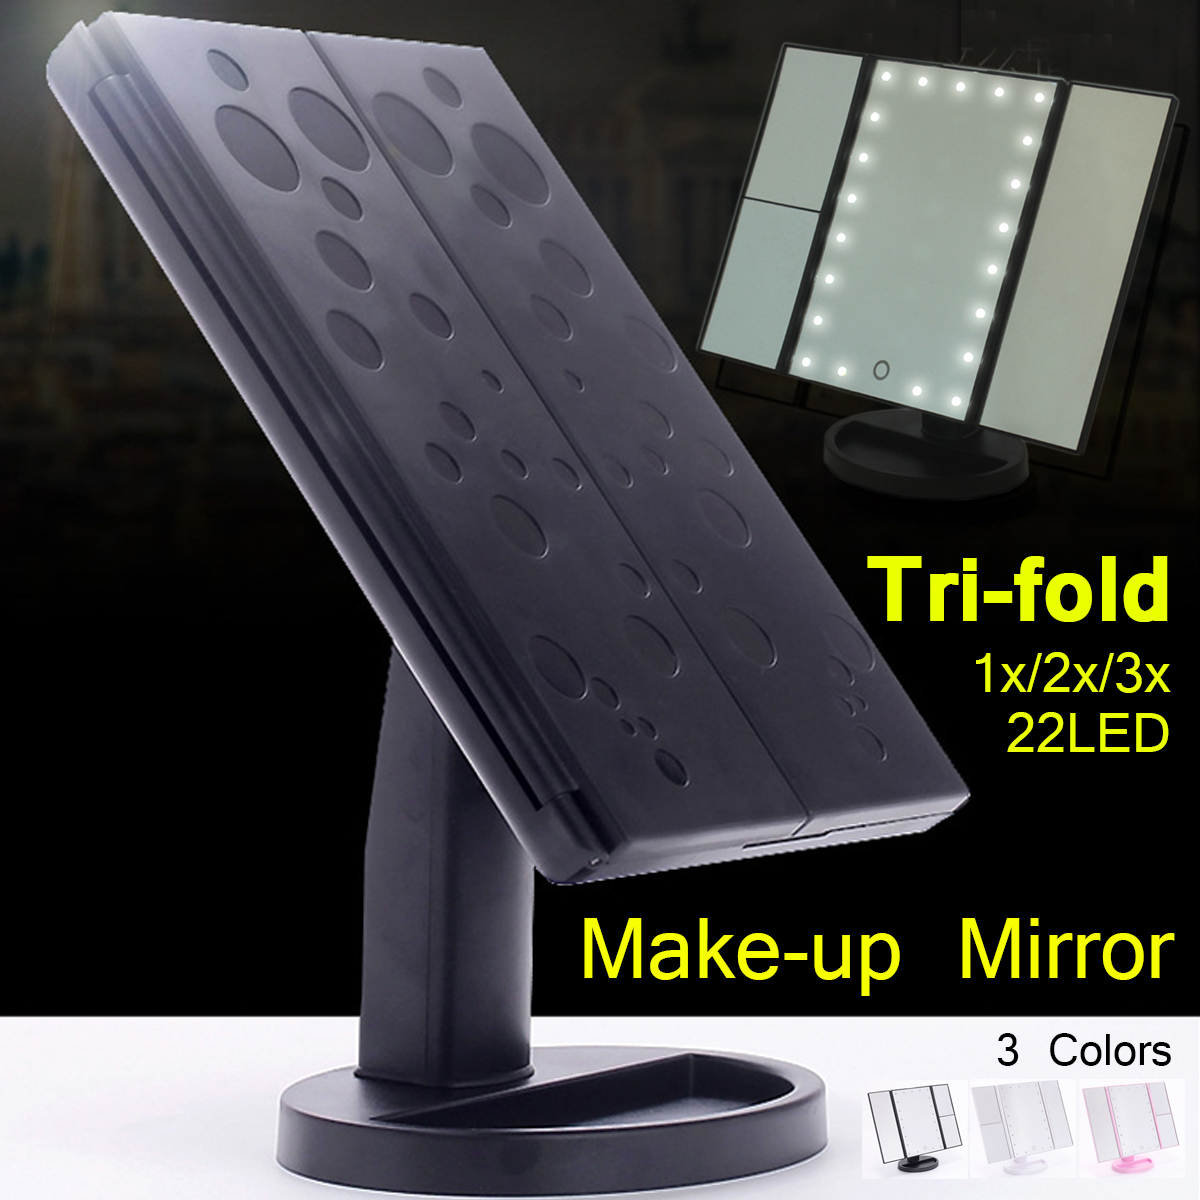 22LED-Tri-Fold-Touch-Screen-Makeup-Mirror-Table-Cosmetic-Vanity-Light-Mirror-1943281-2